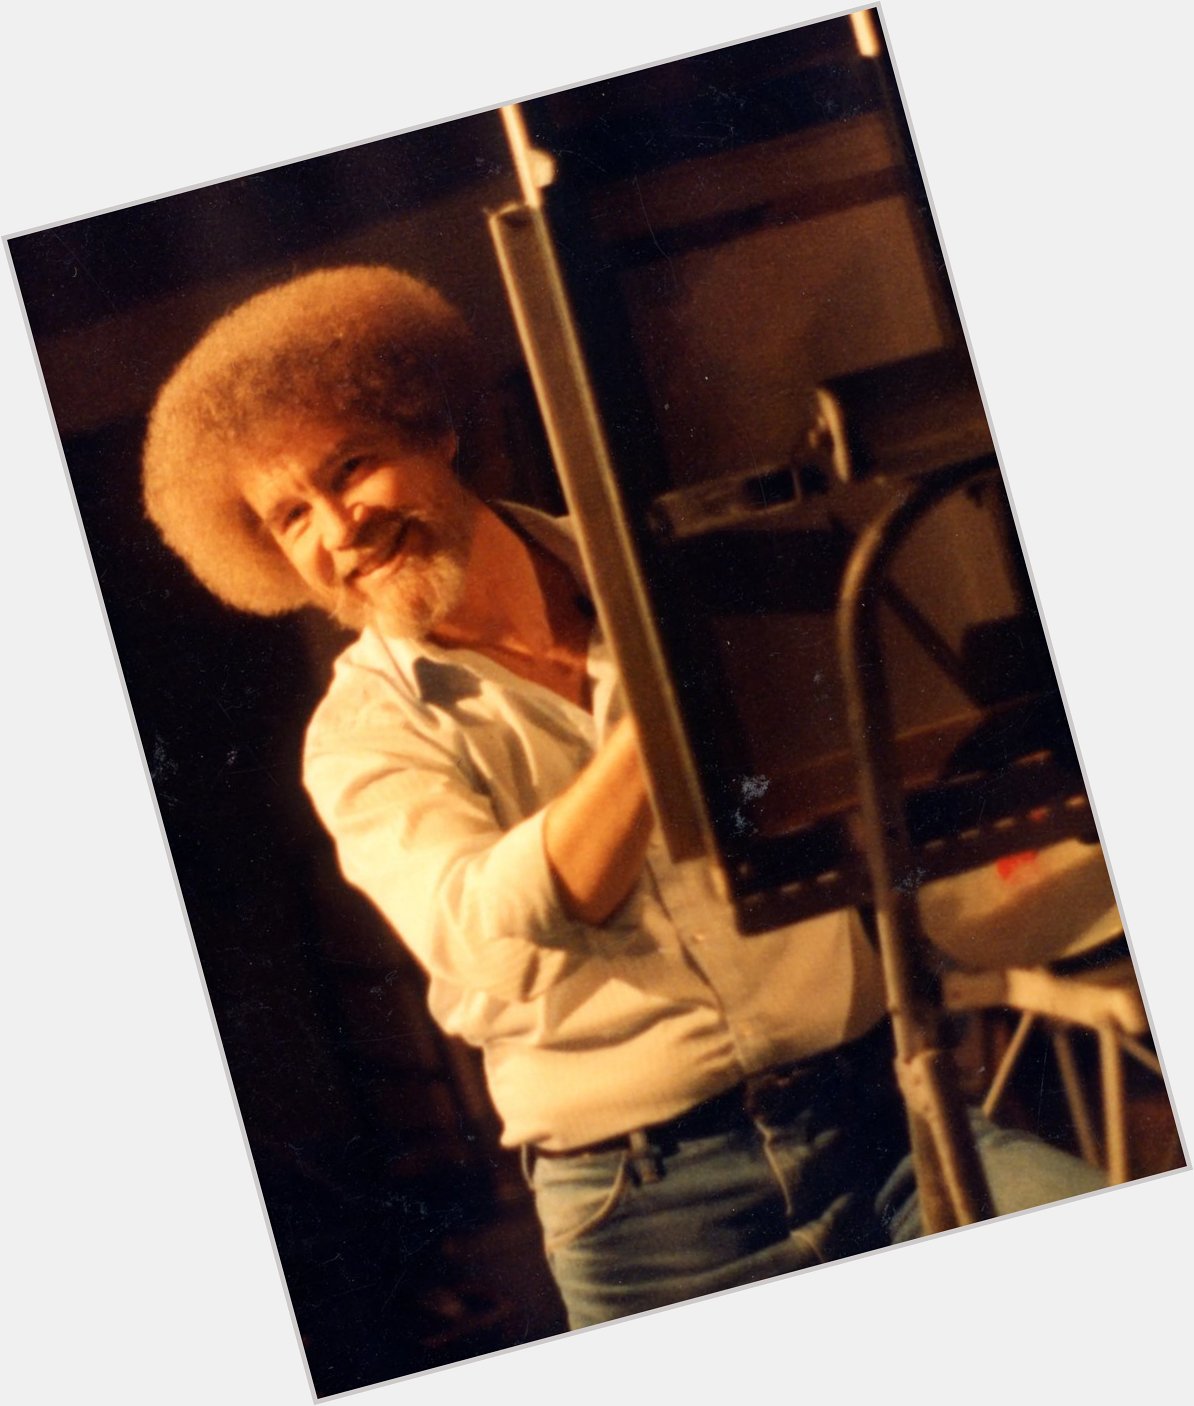 Today is Bob Ross birthday so in honor of him go paint or create something  happy little trees->  